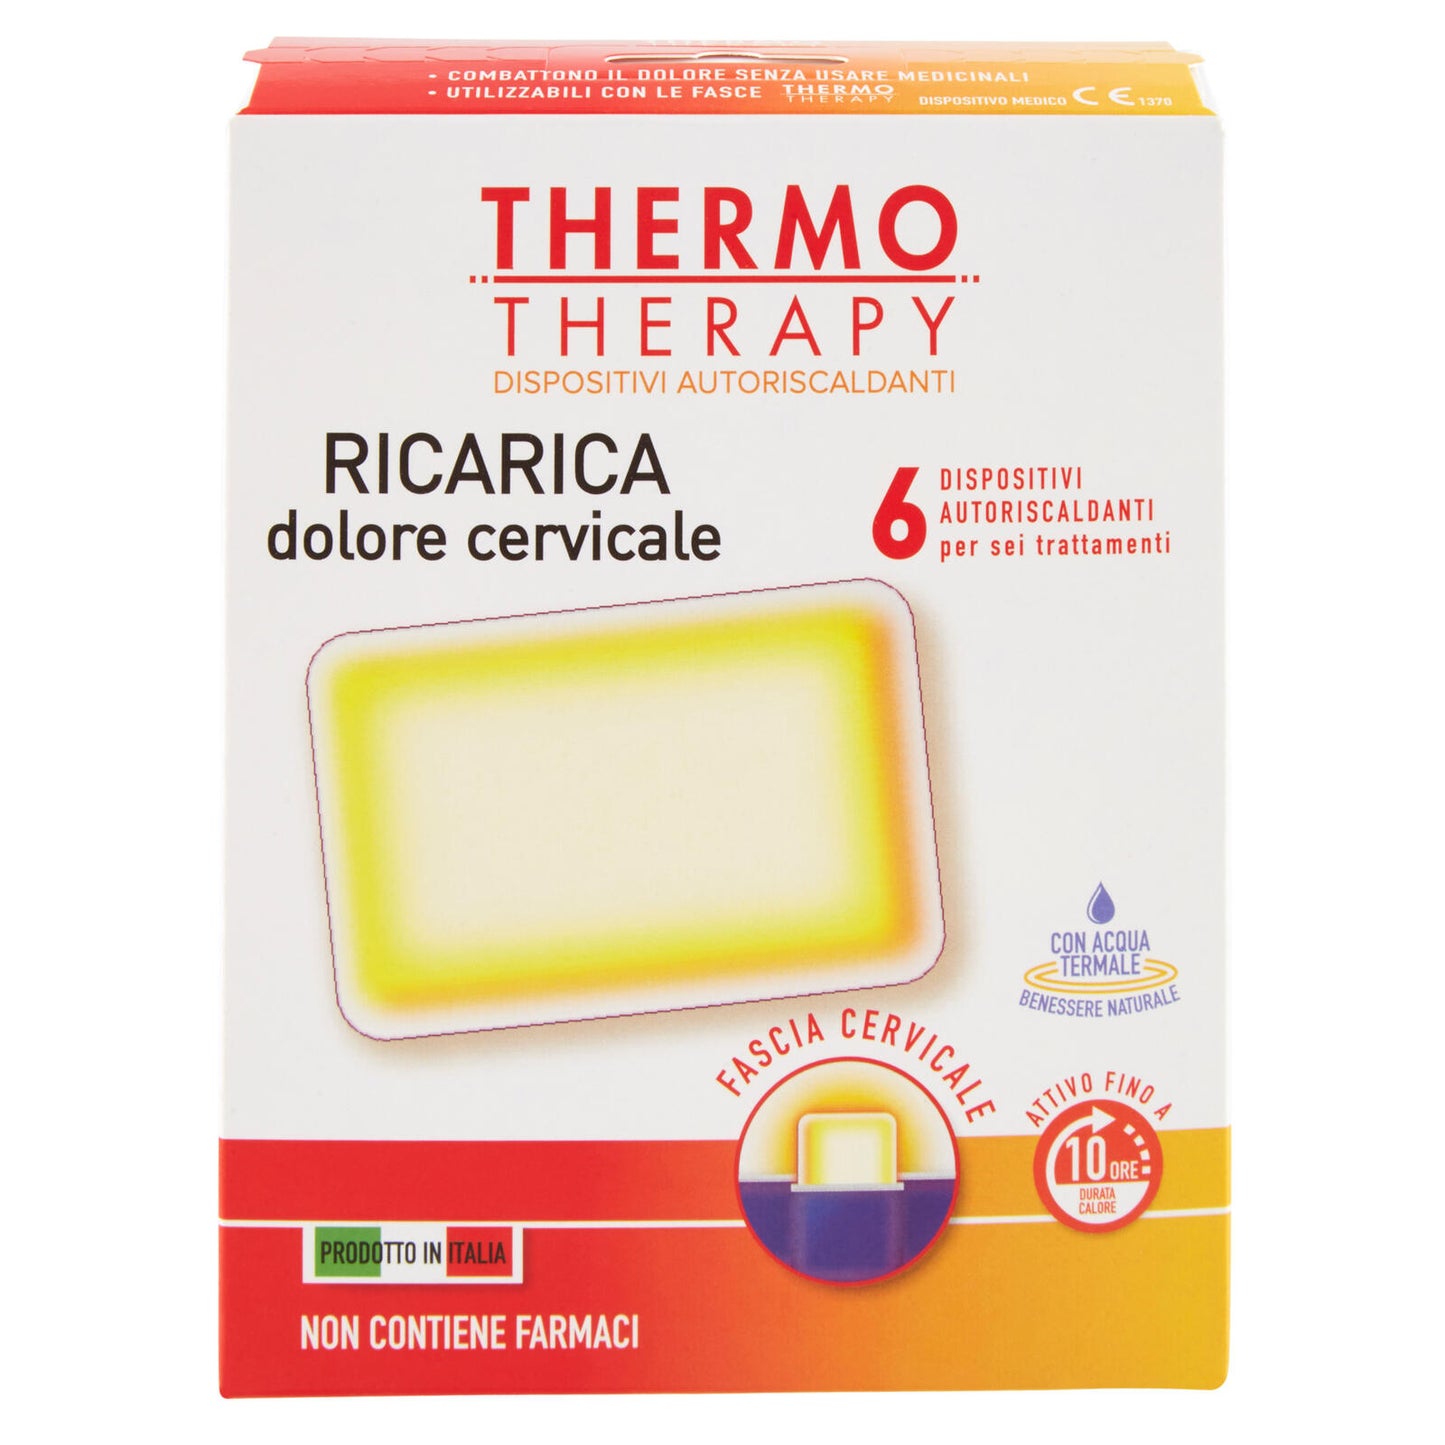 ThermoTherapy dolore cervicale Ricarica 6 pz